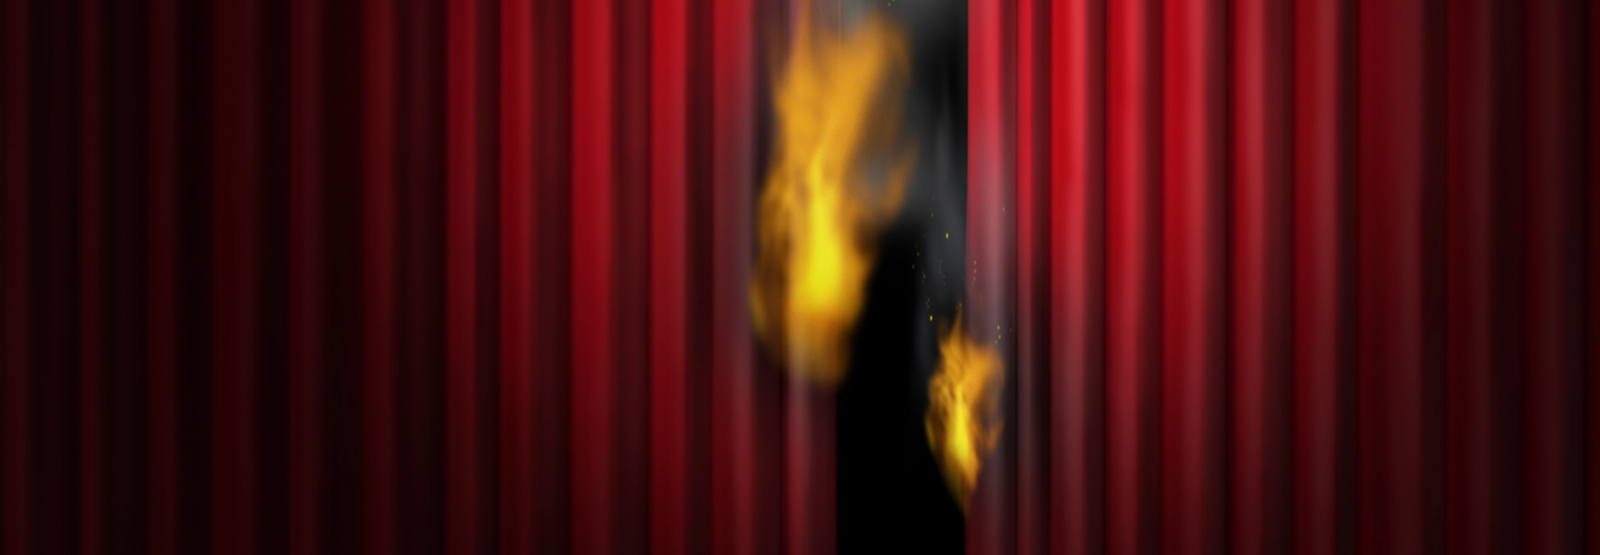 stage drapes on fire